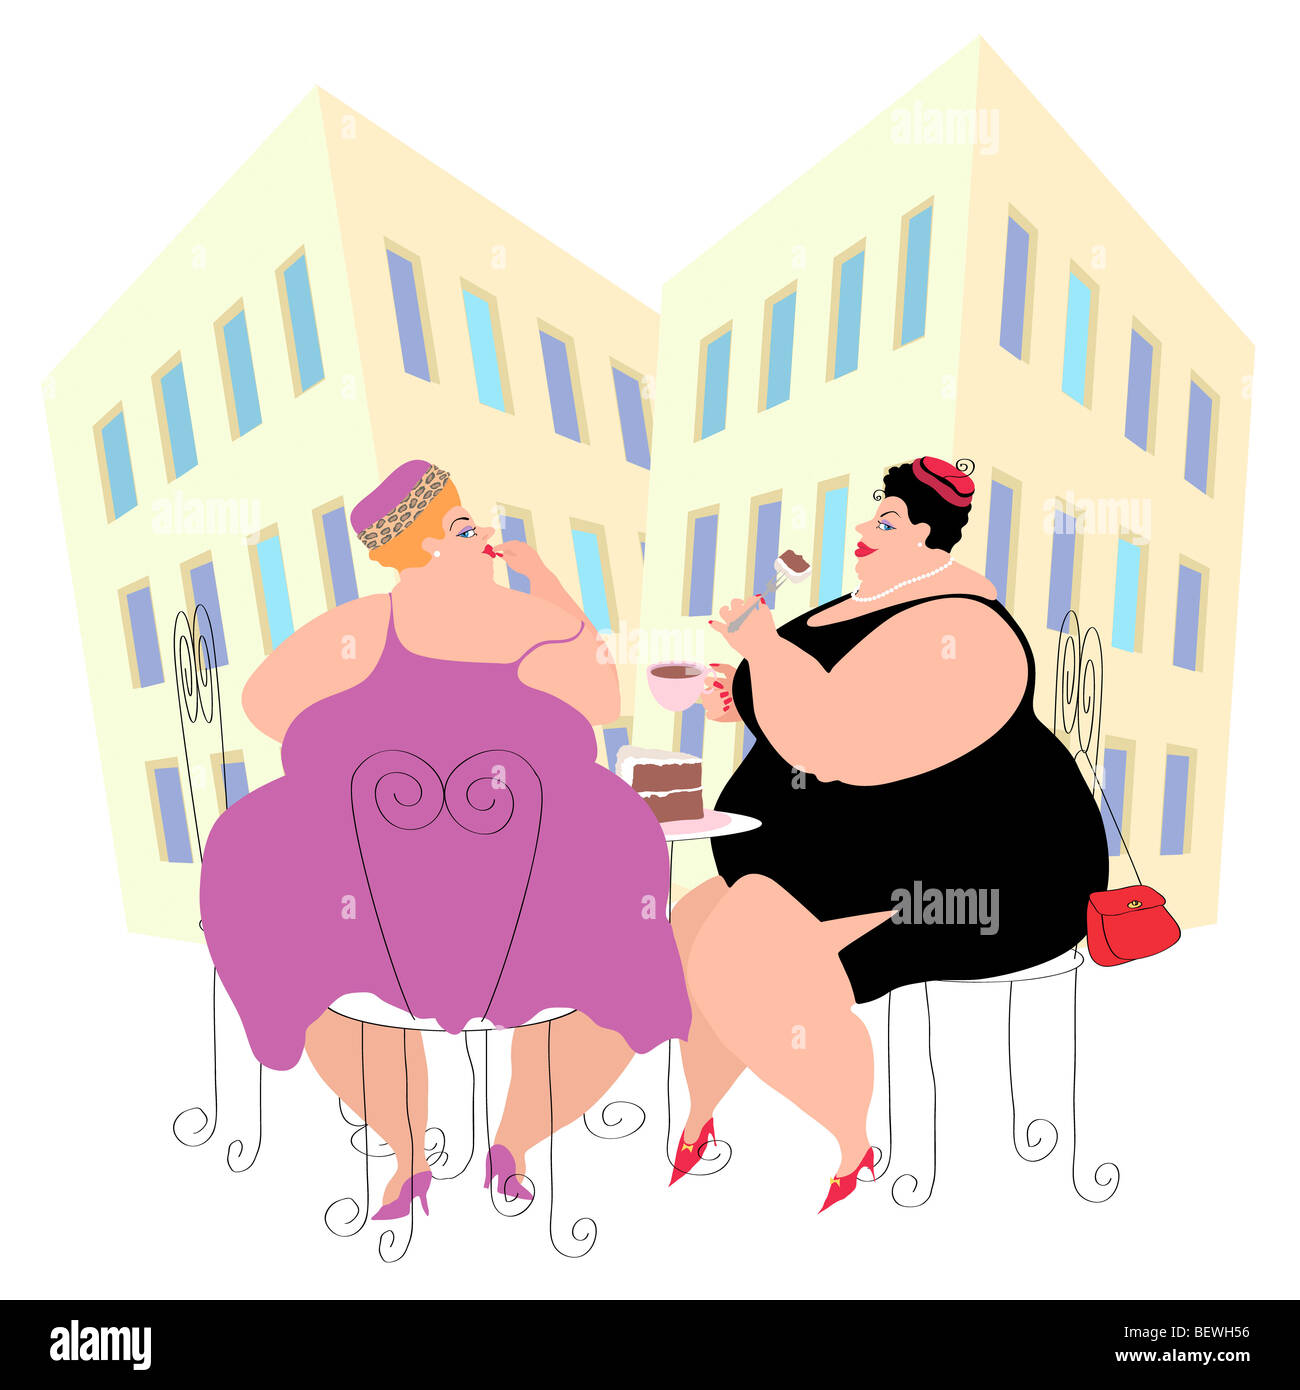 Social Lady of Size 6, Linda Braucht (b.20th Century/American), Computer Graphics Stock Photo